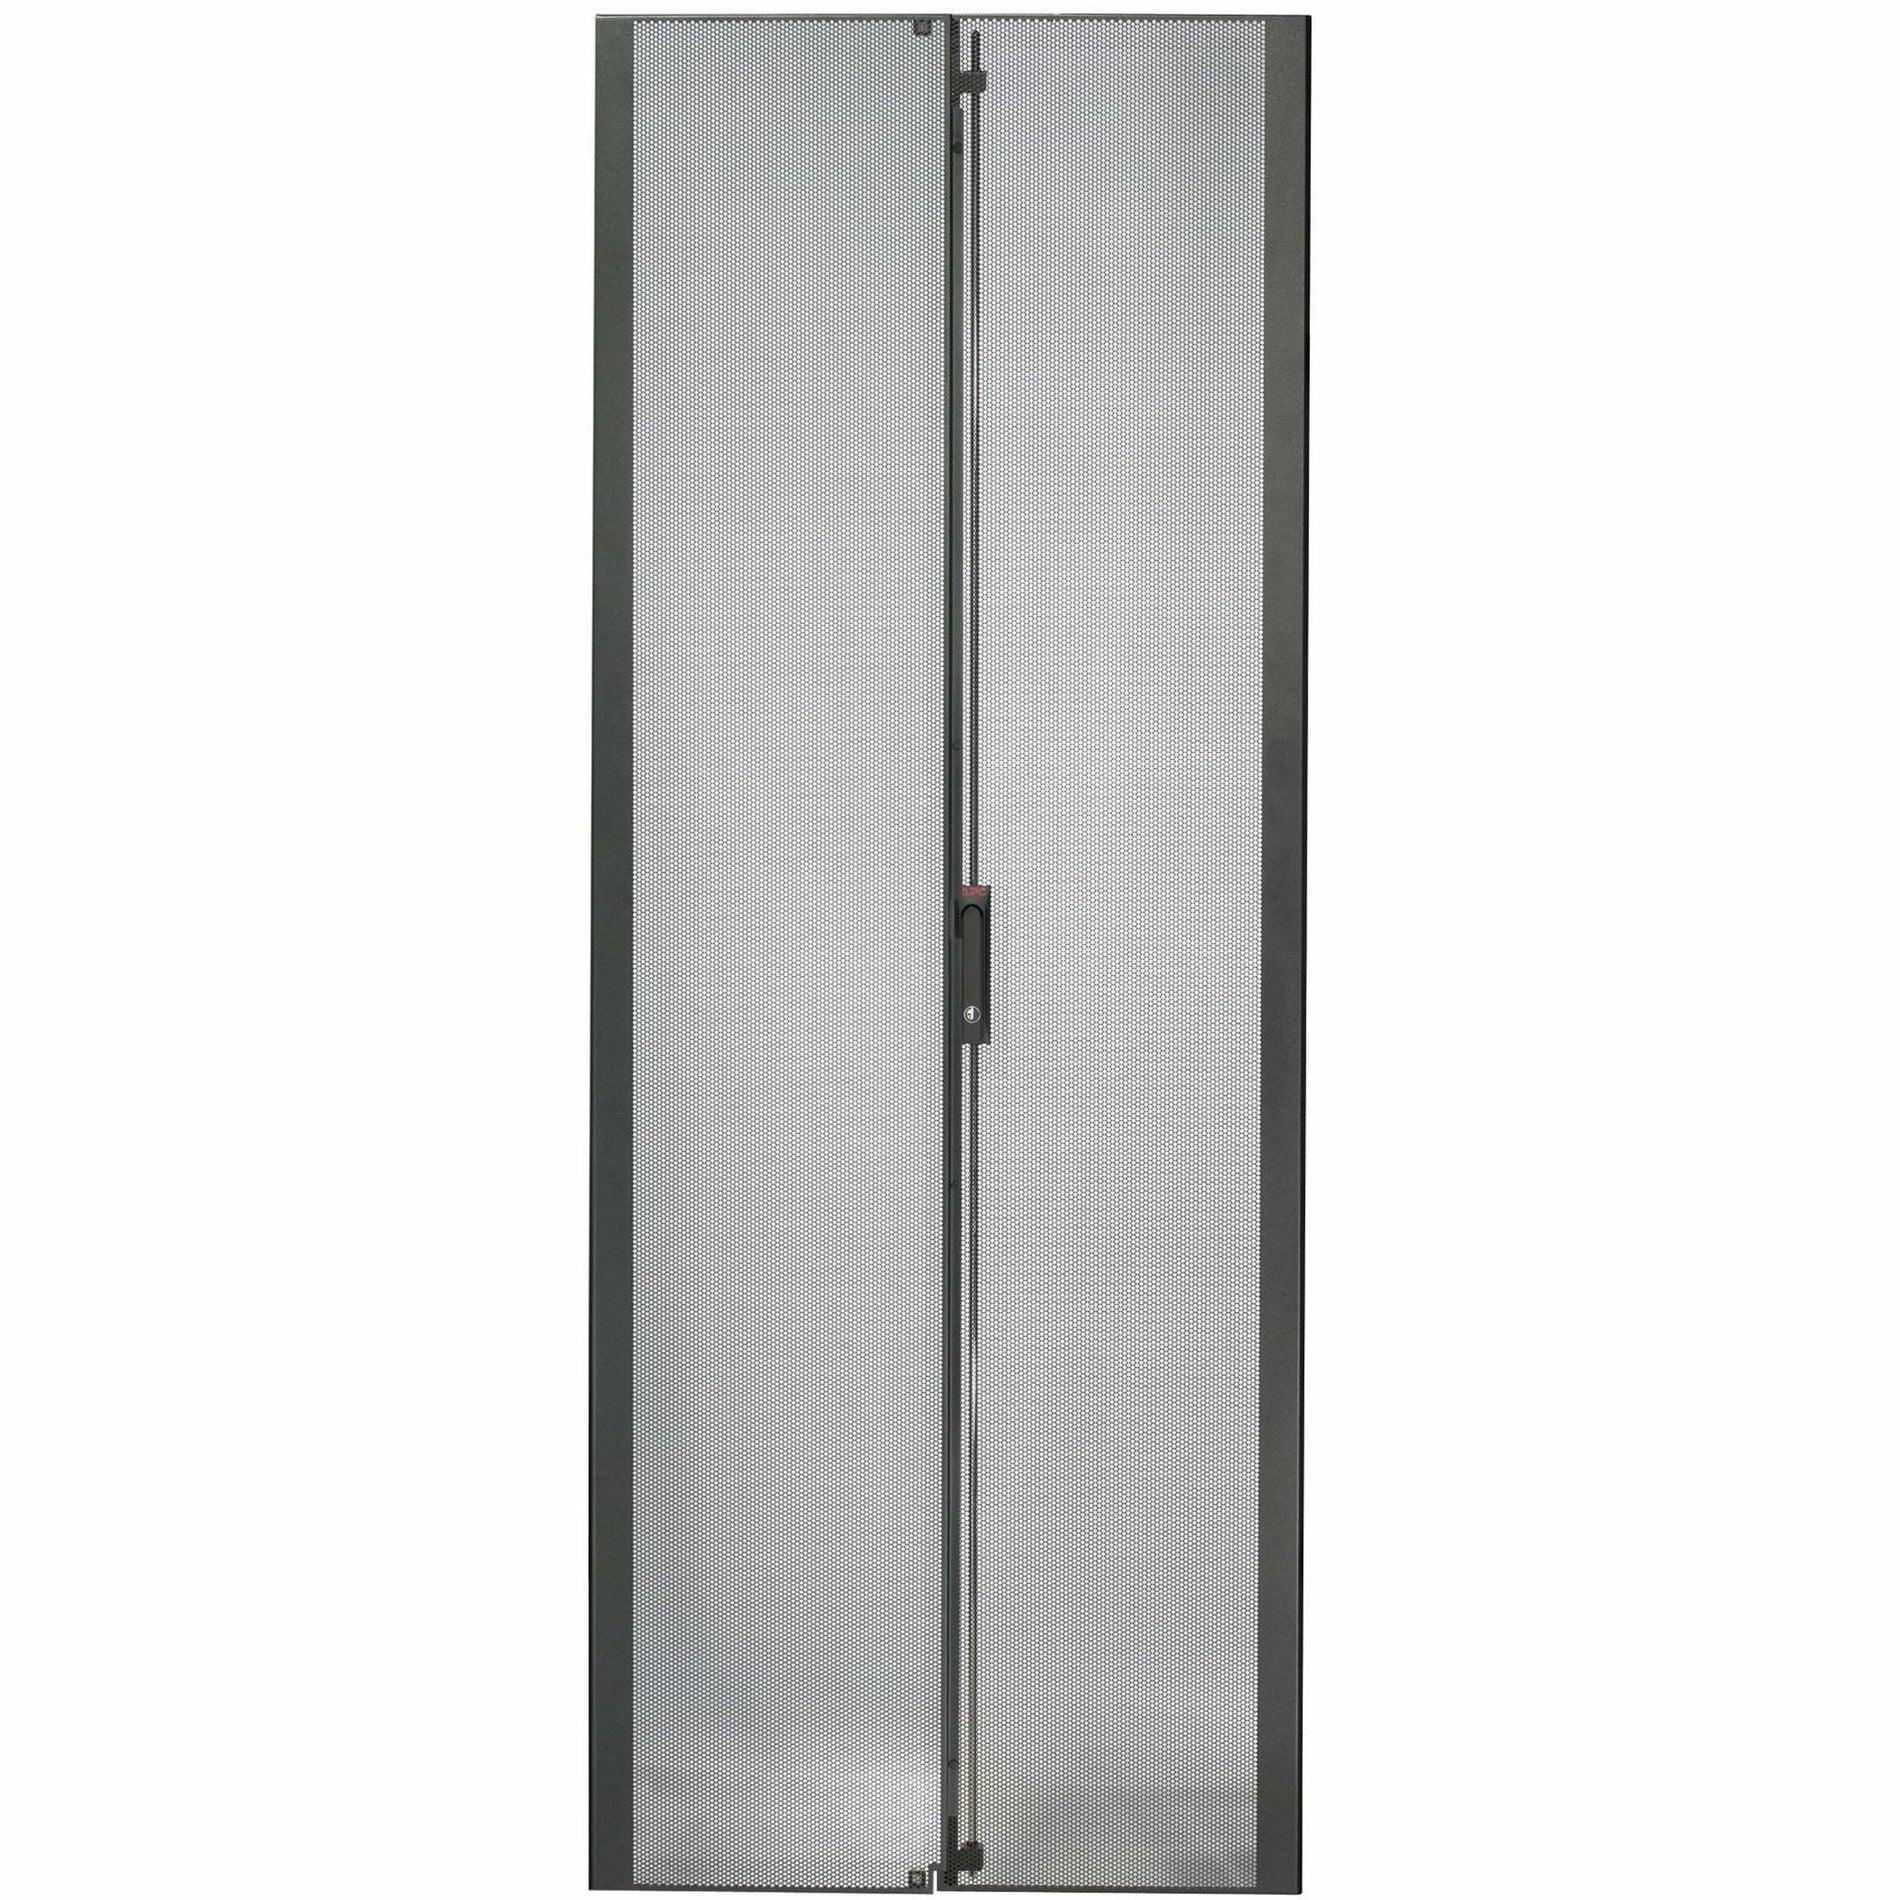 APC by Schneider Electric AR7107 NetShelter SX Wide Perforated Split Doors